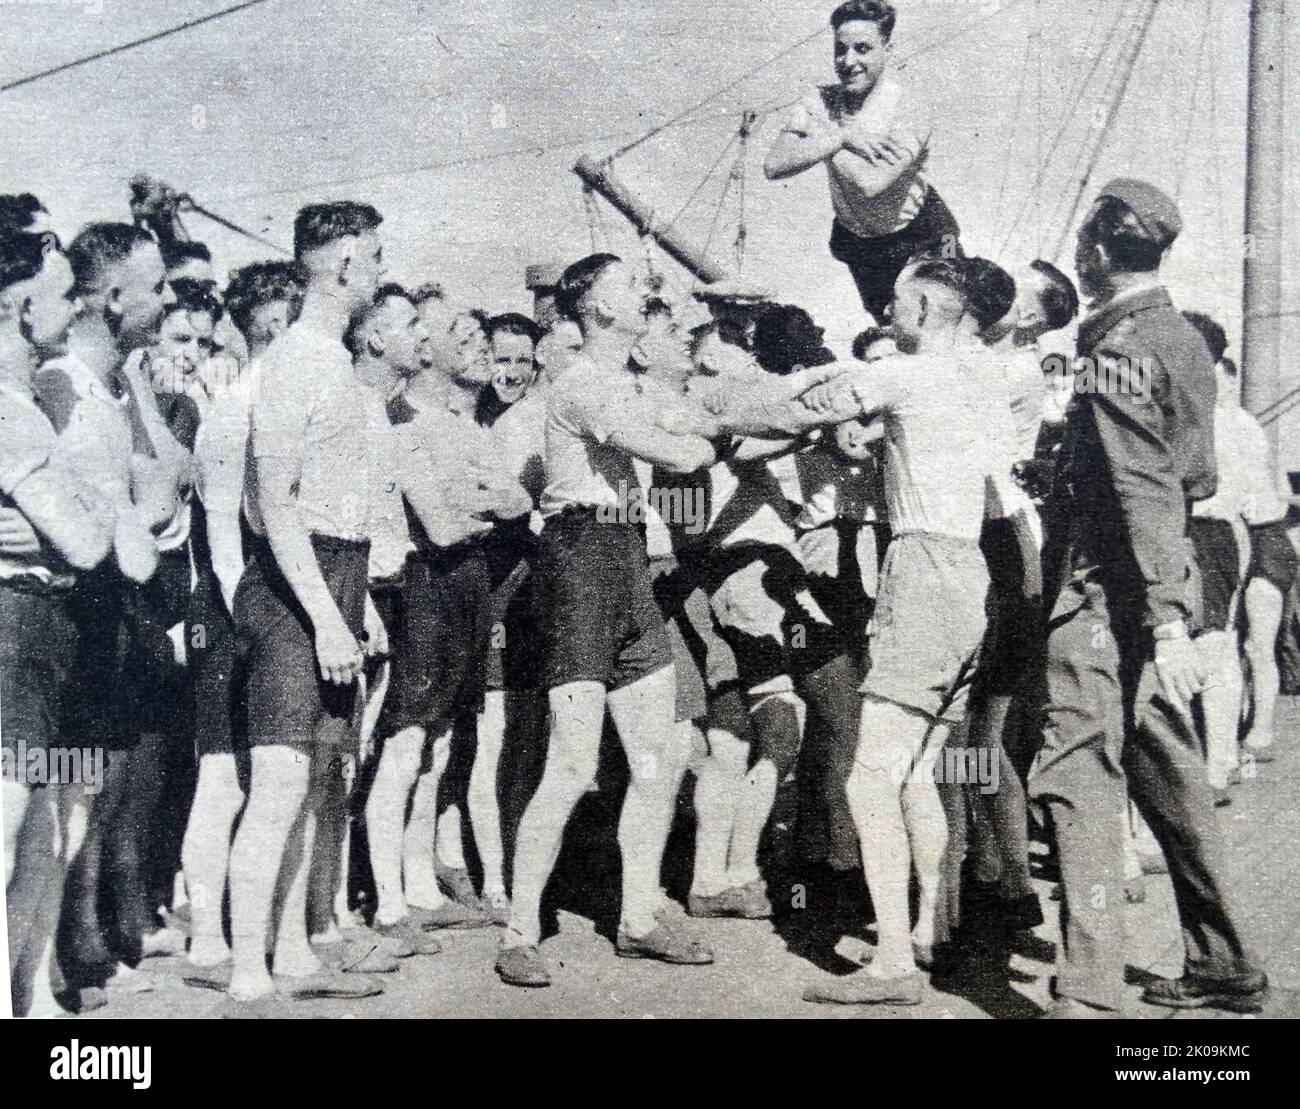 British Army troops doing physical training on a troopship during World War II. Stock Photo